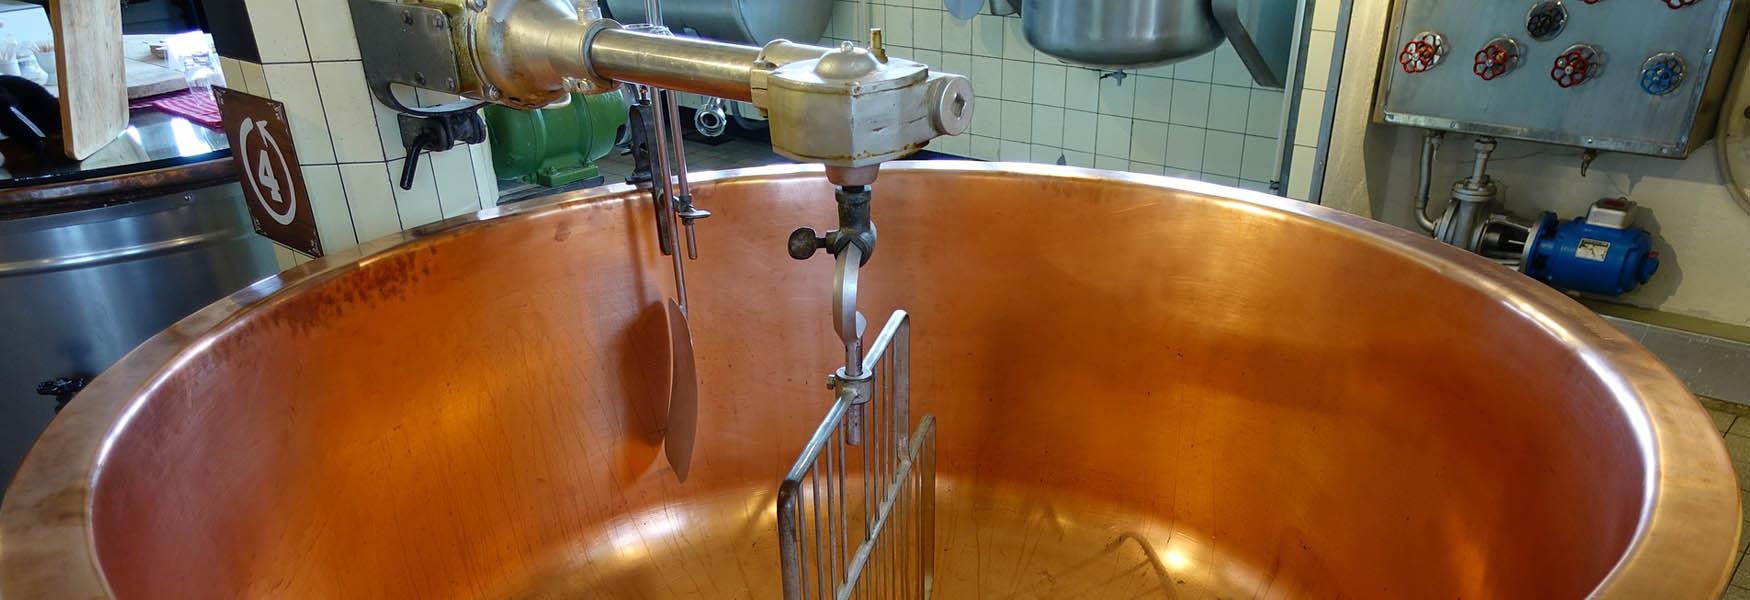 brewery mixer in bedfordshire